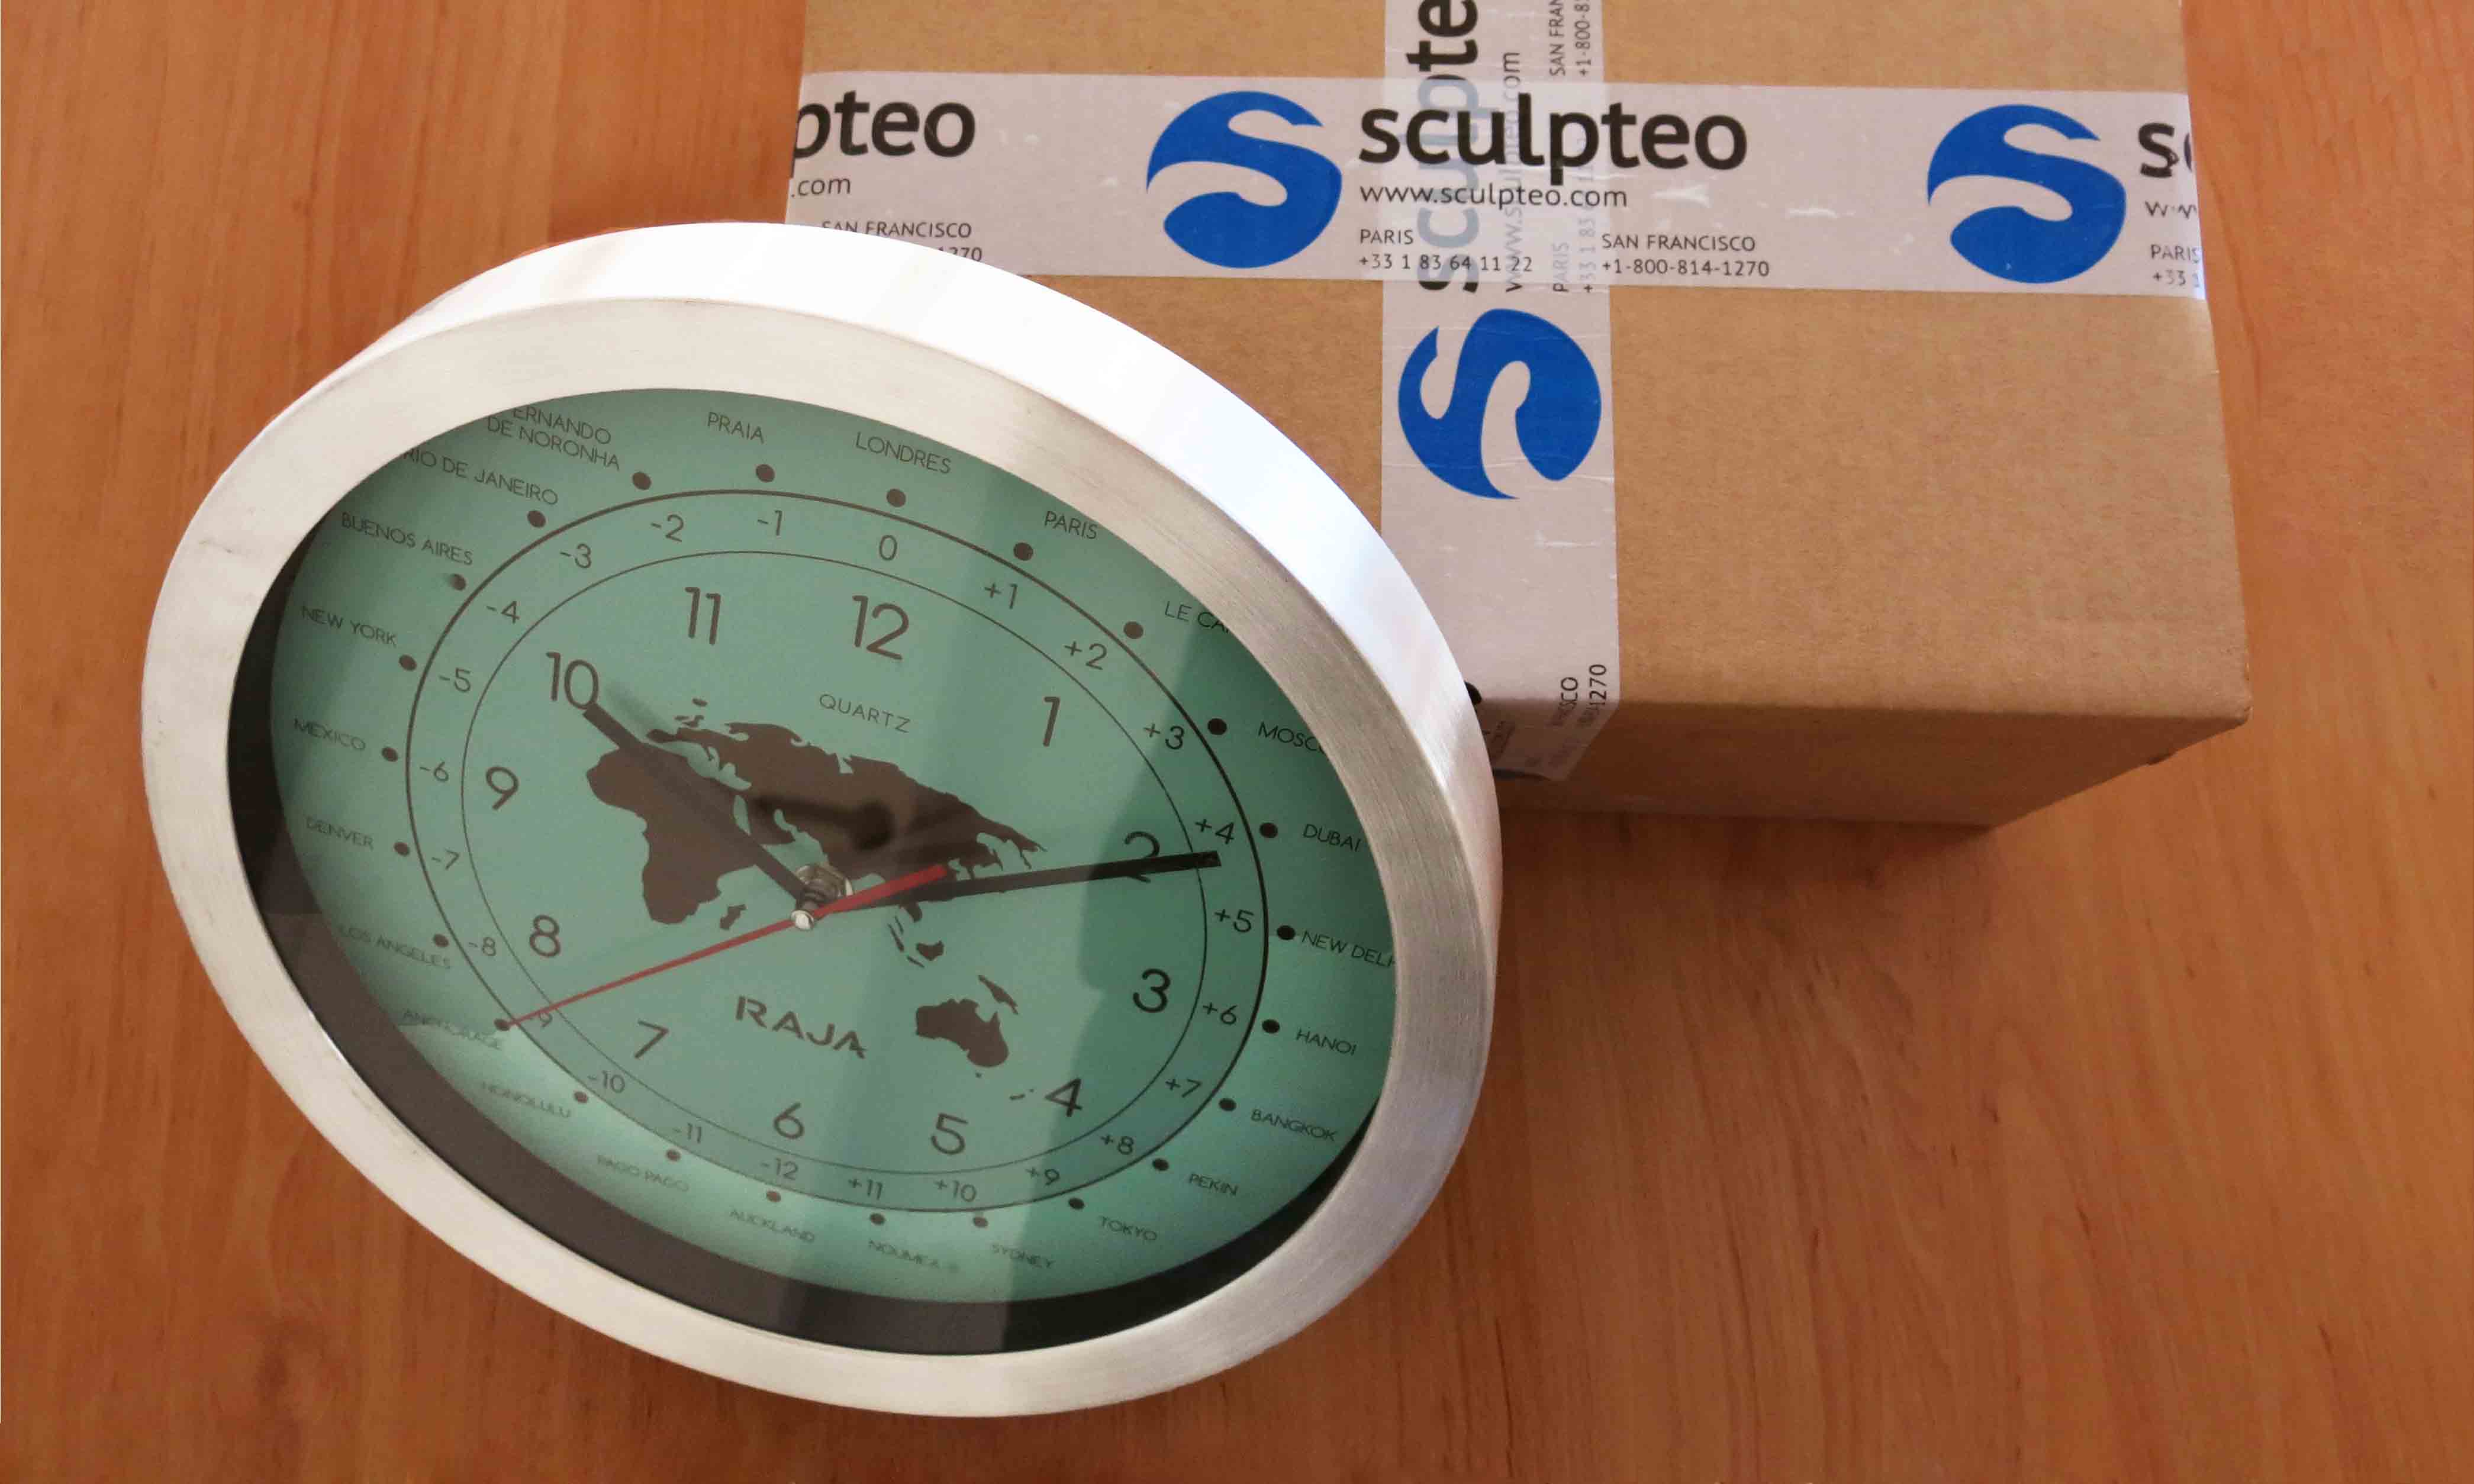 25% orders are delivered in advance! | Sculpteo Blog